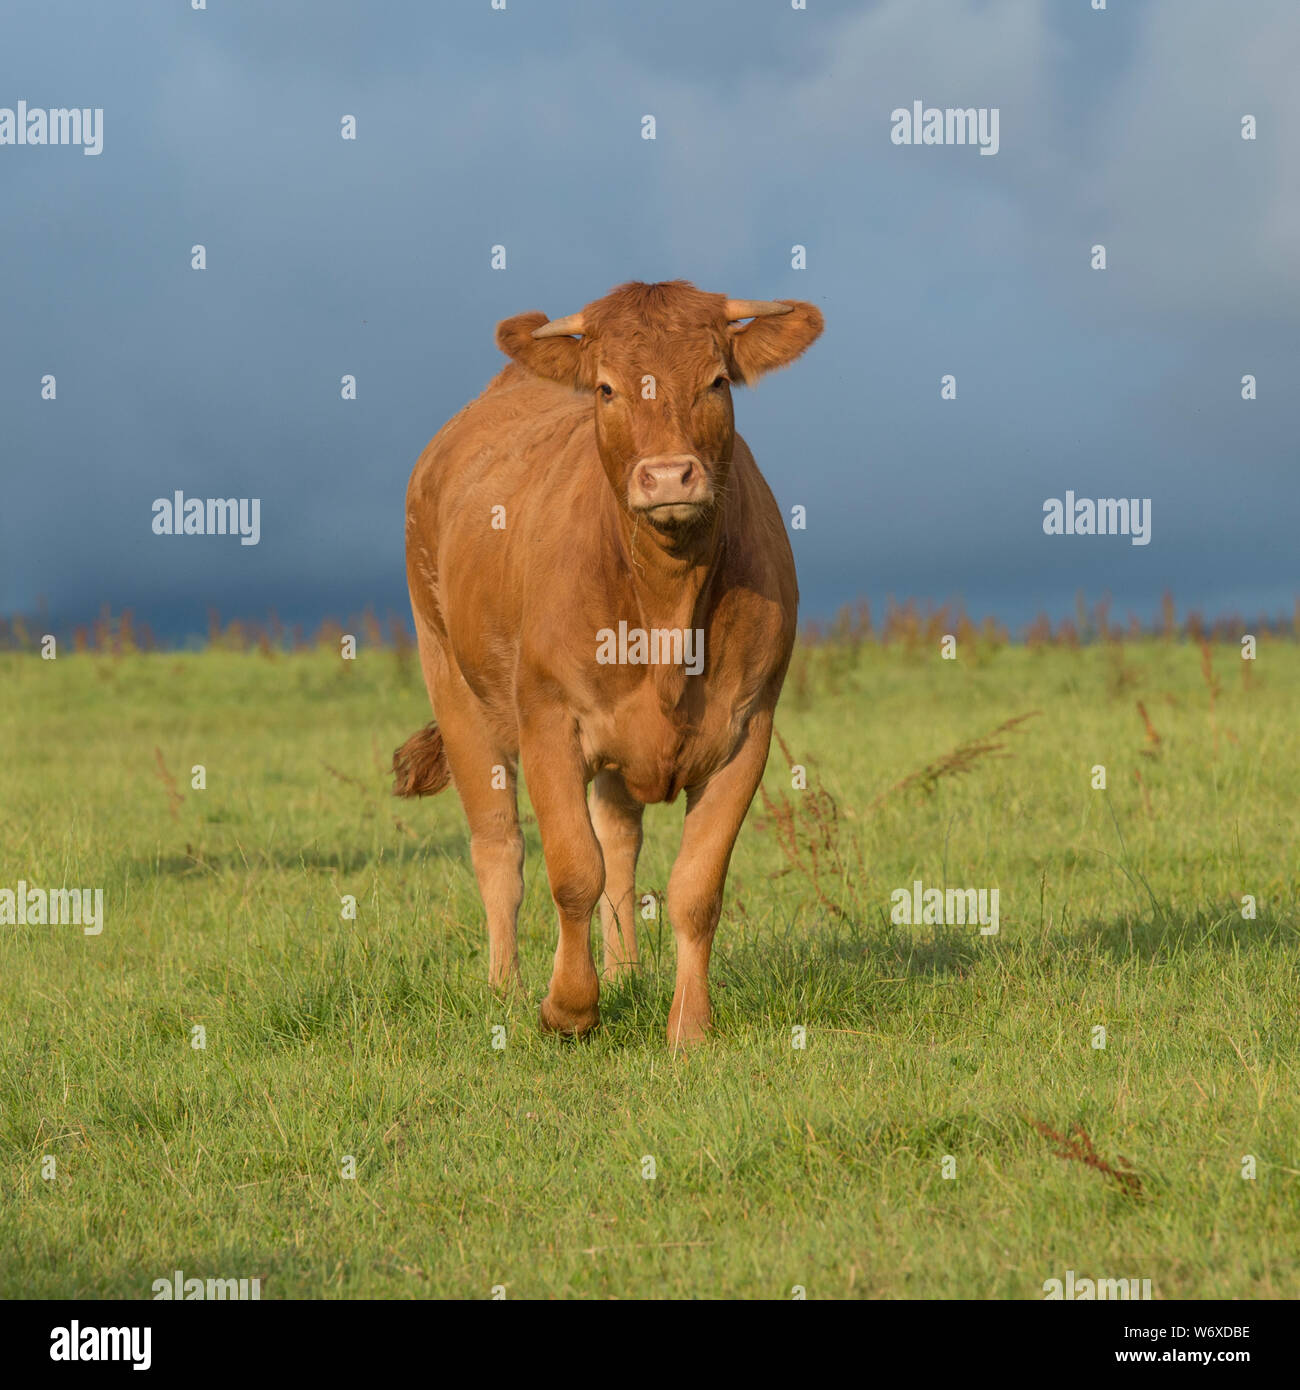 cow in field Stock Photo